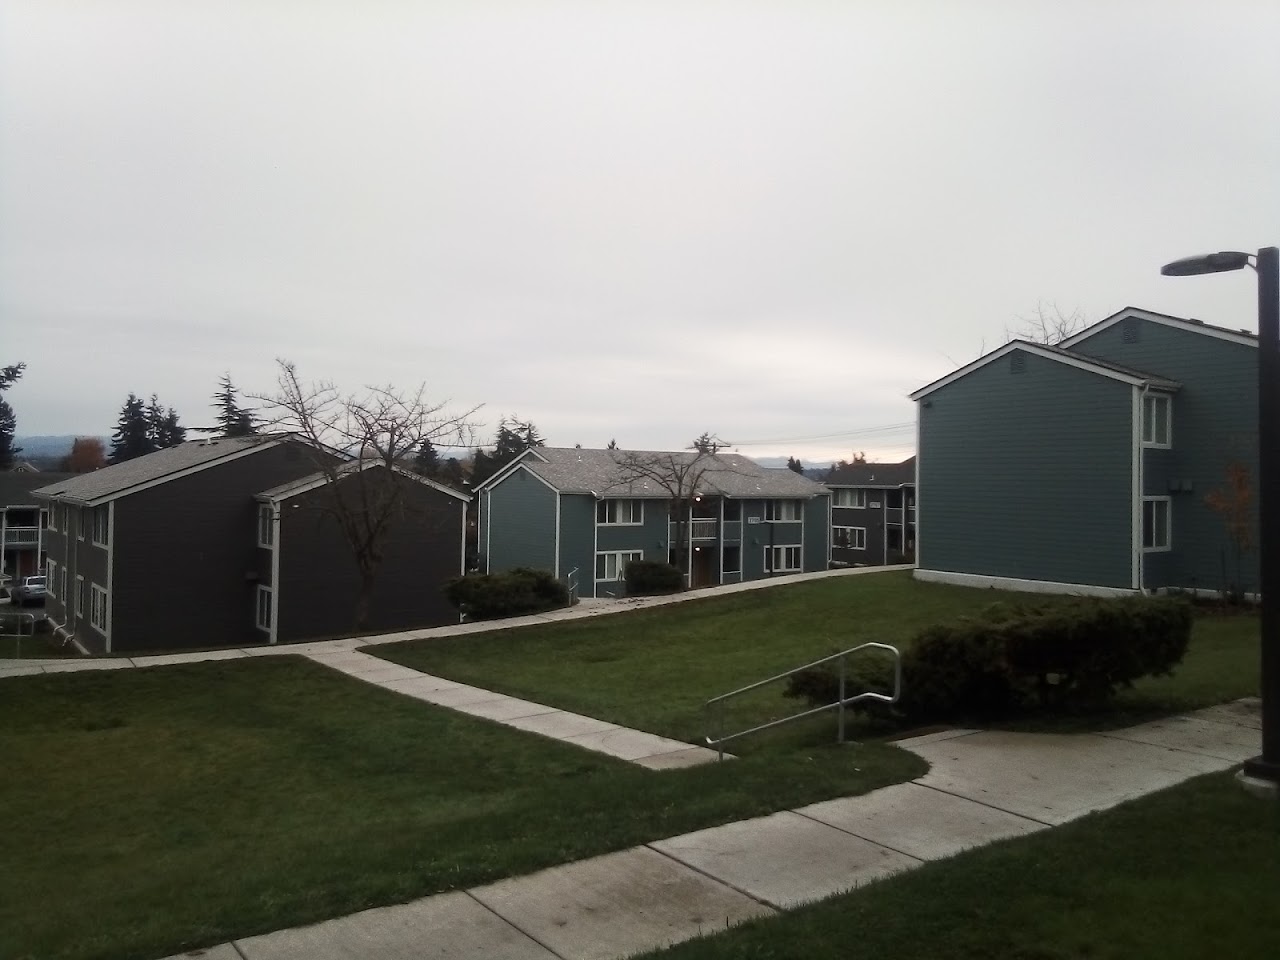 Photo of WIGGUMS PARK PLACE. Affordable housing located at 2701 12TH STREET EVERETT, WA 98201